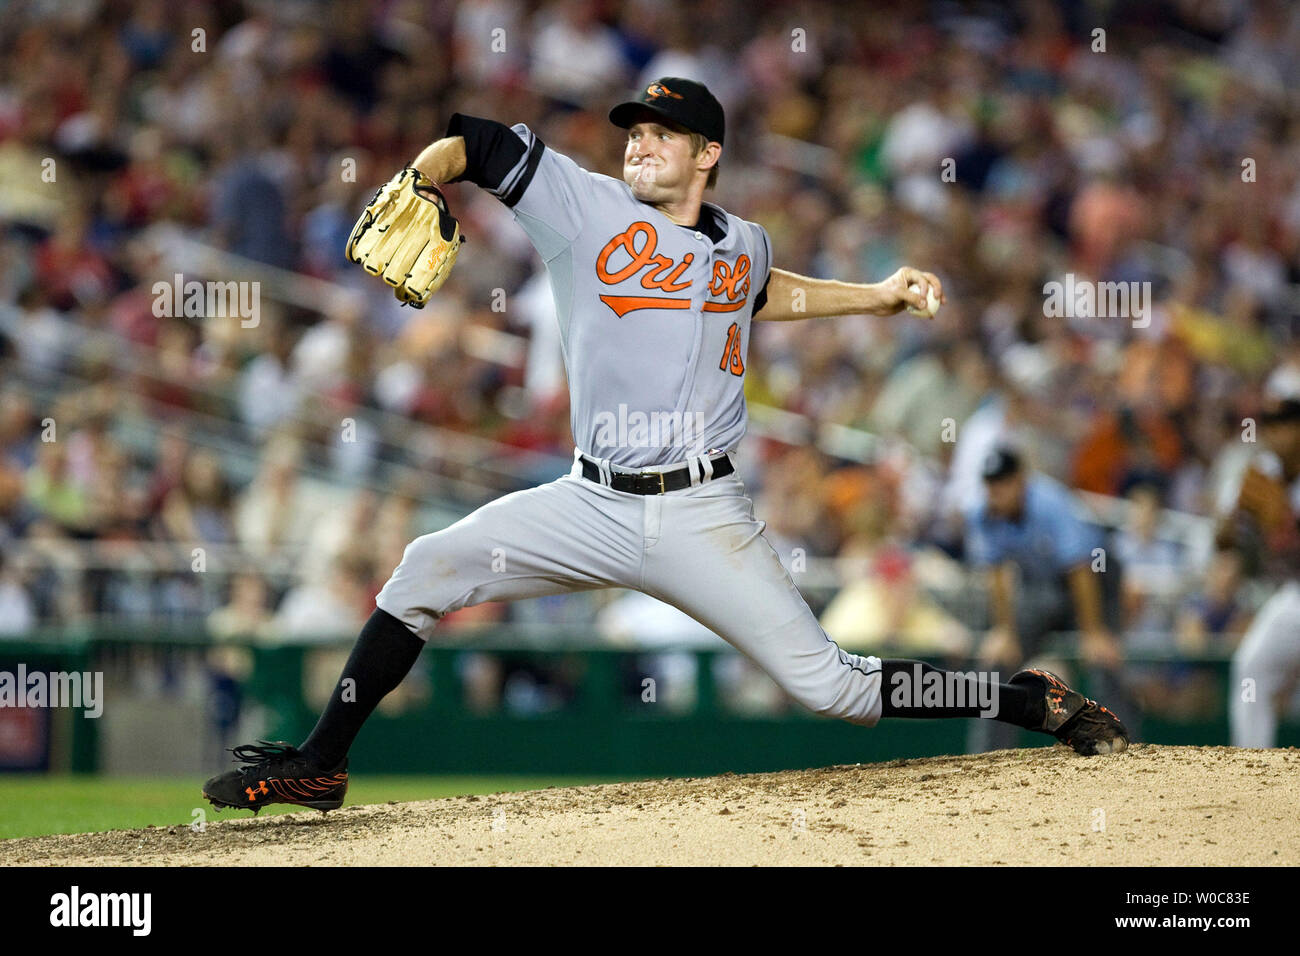 Baltimore Orioles starting pitcher Garrett Olson (18) pitches during the bottom of the 5th inning against the Washington Nationals at Nationals Park in Washington on June 28, 2008. (UPI Photo/Patrick D. McDermott) Stock Photo